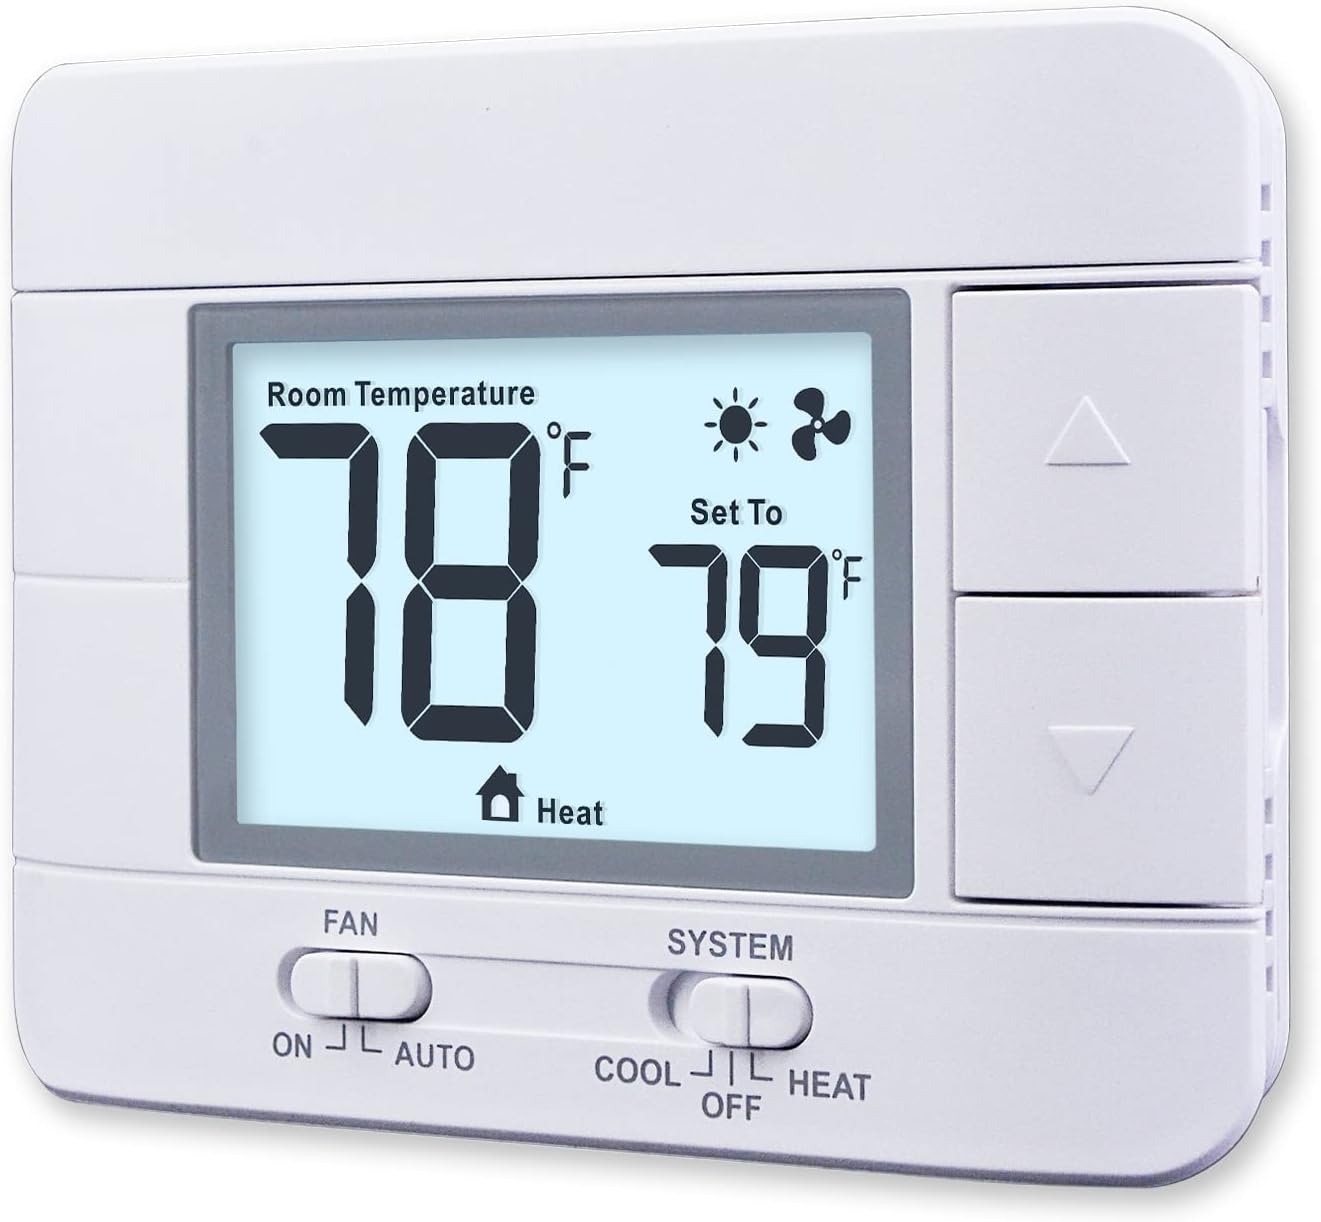 Aowel Non-Programmable Thermostats for Home 1 Heat/ 1 Cool, with Room Temperature